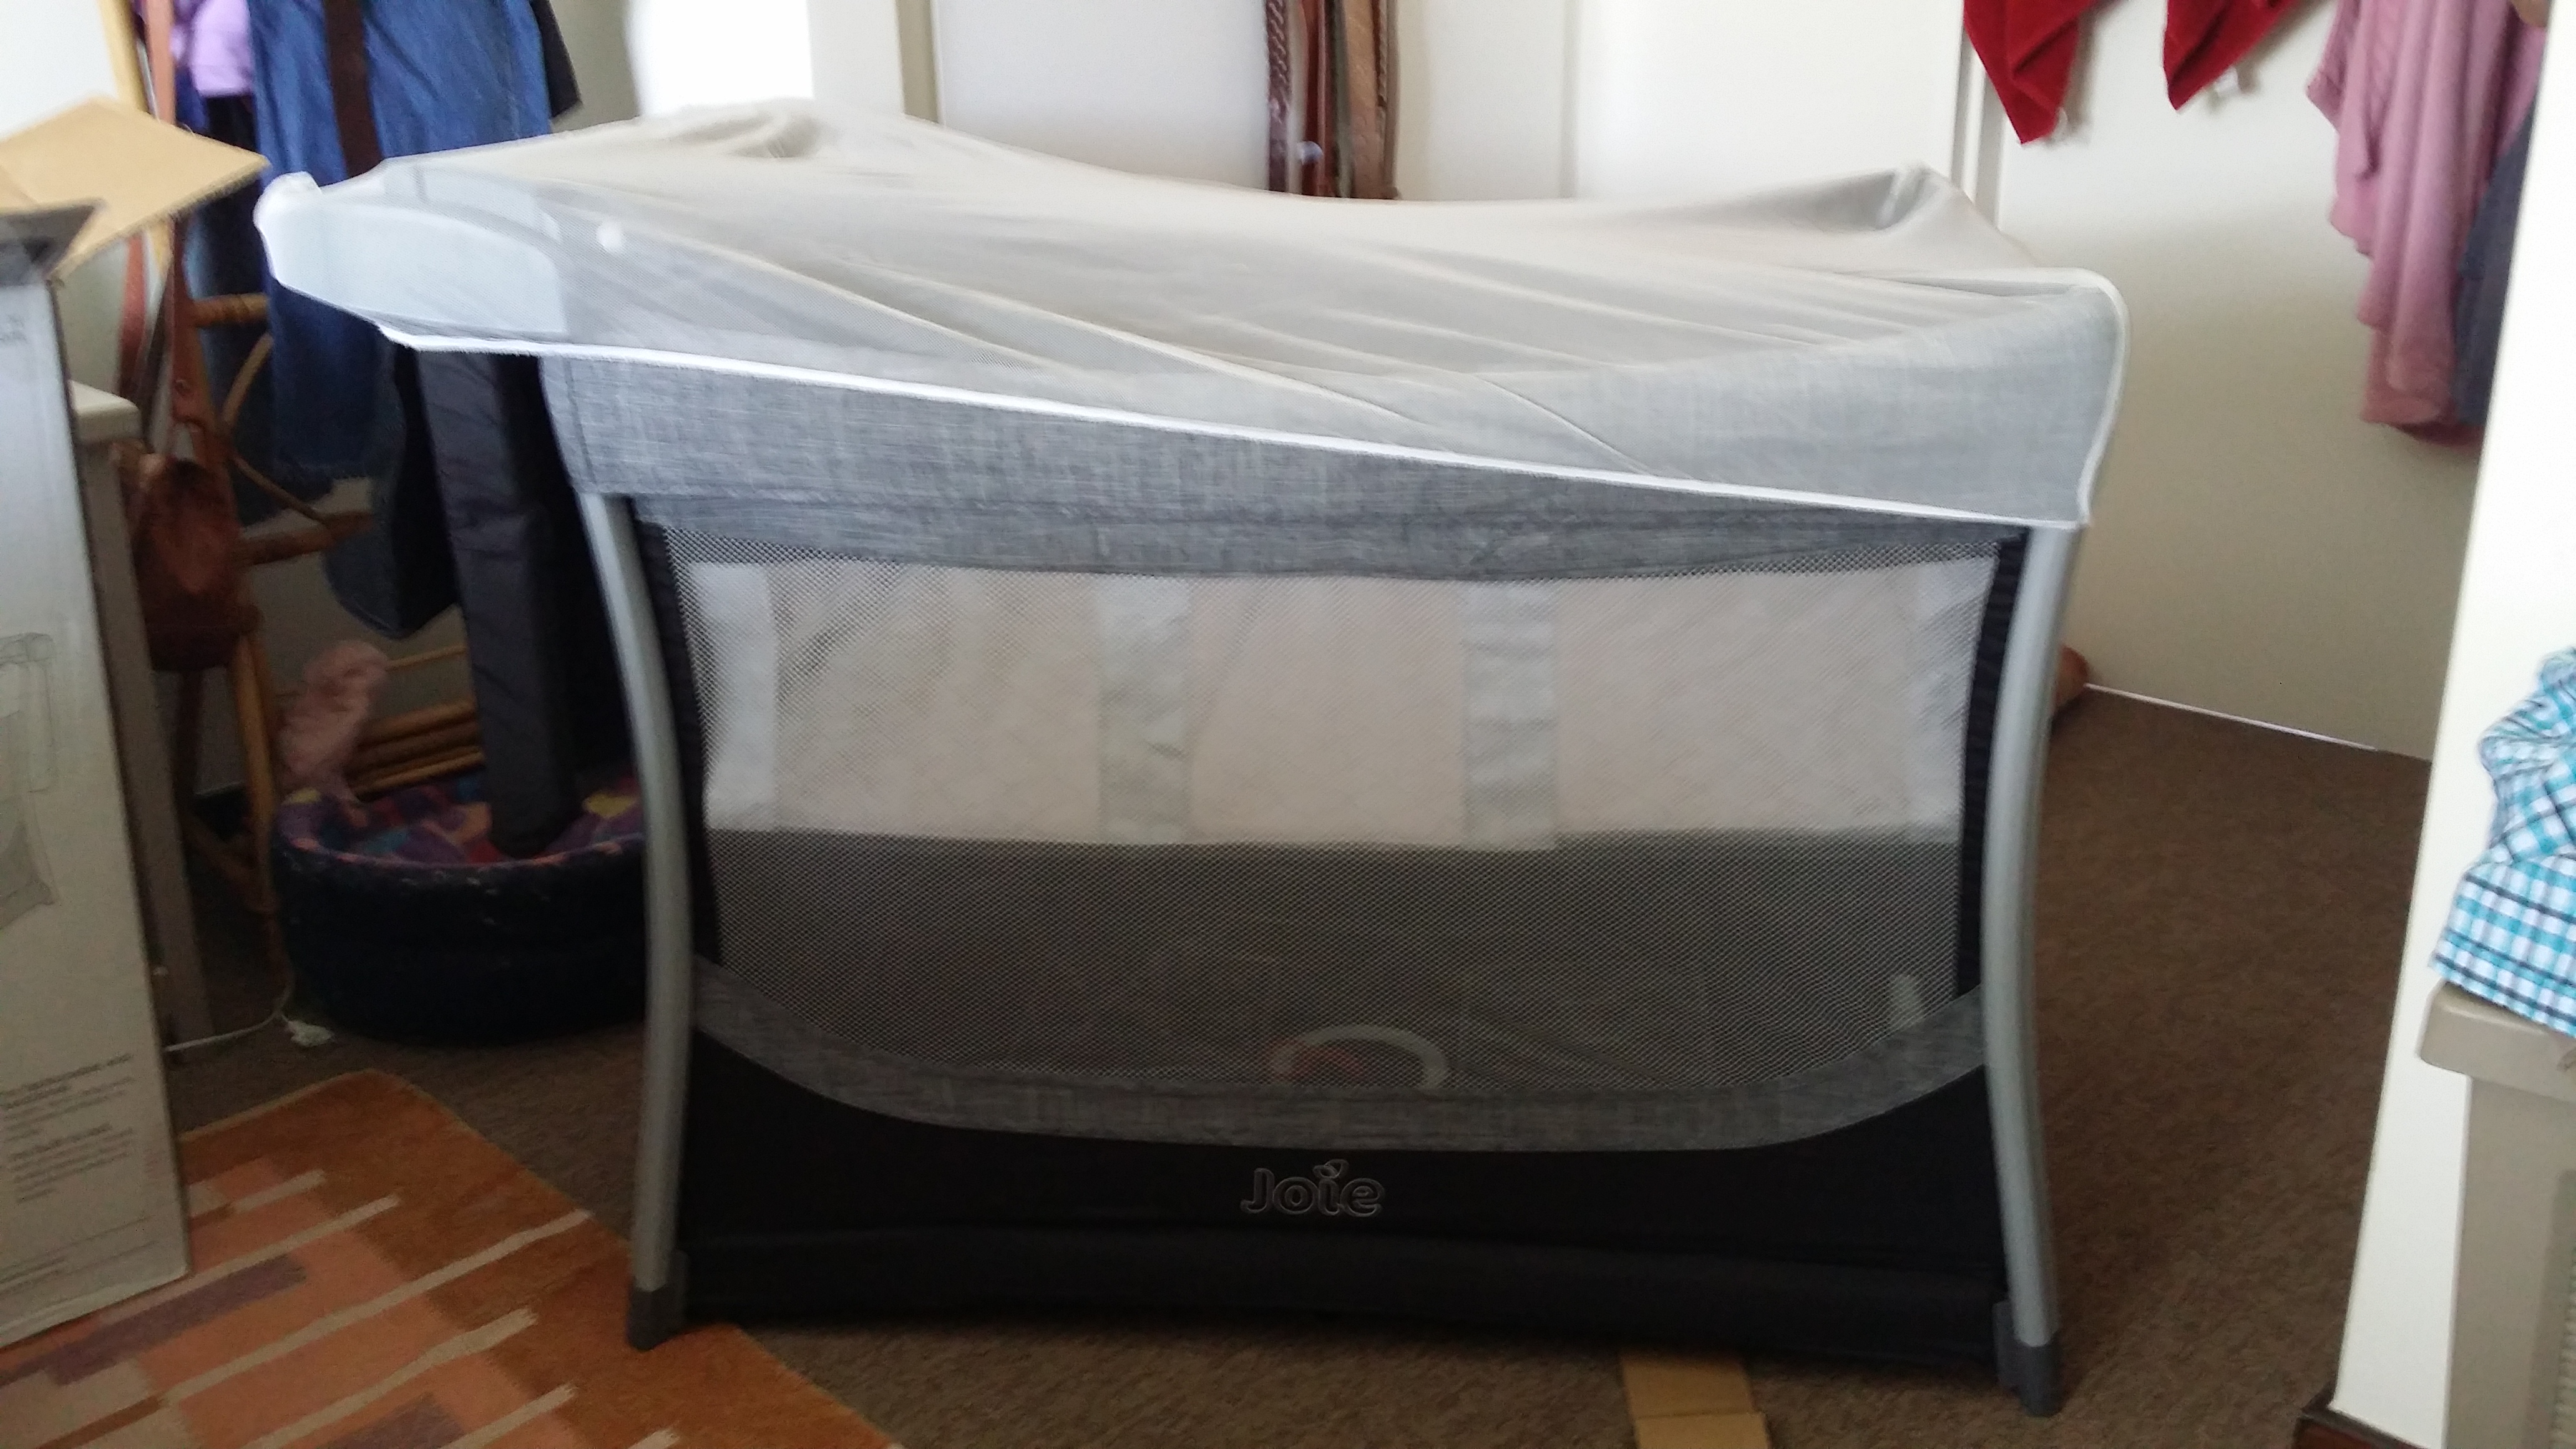 joie travel cot changing table